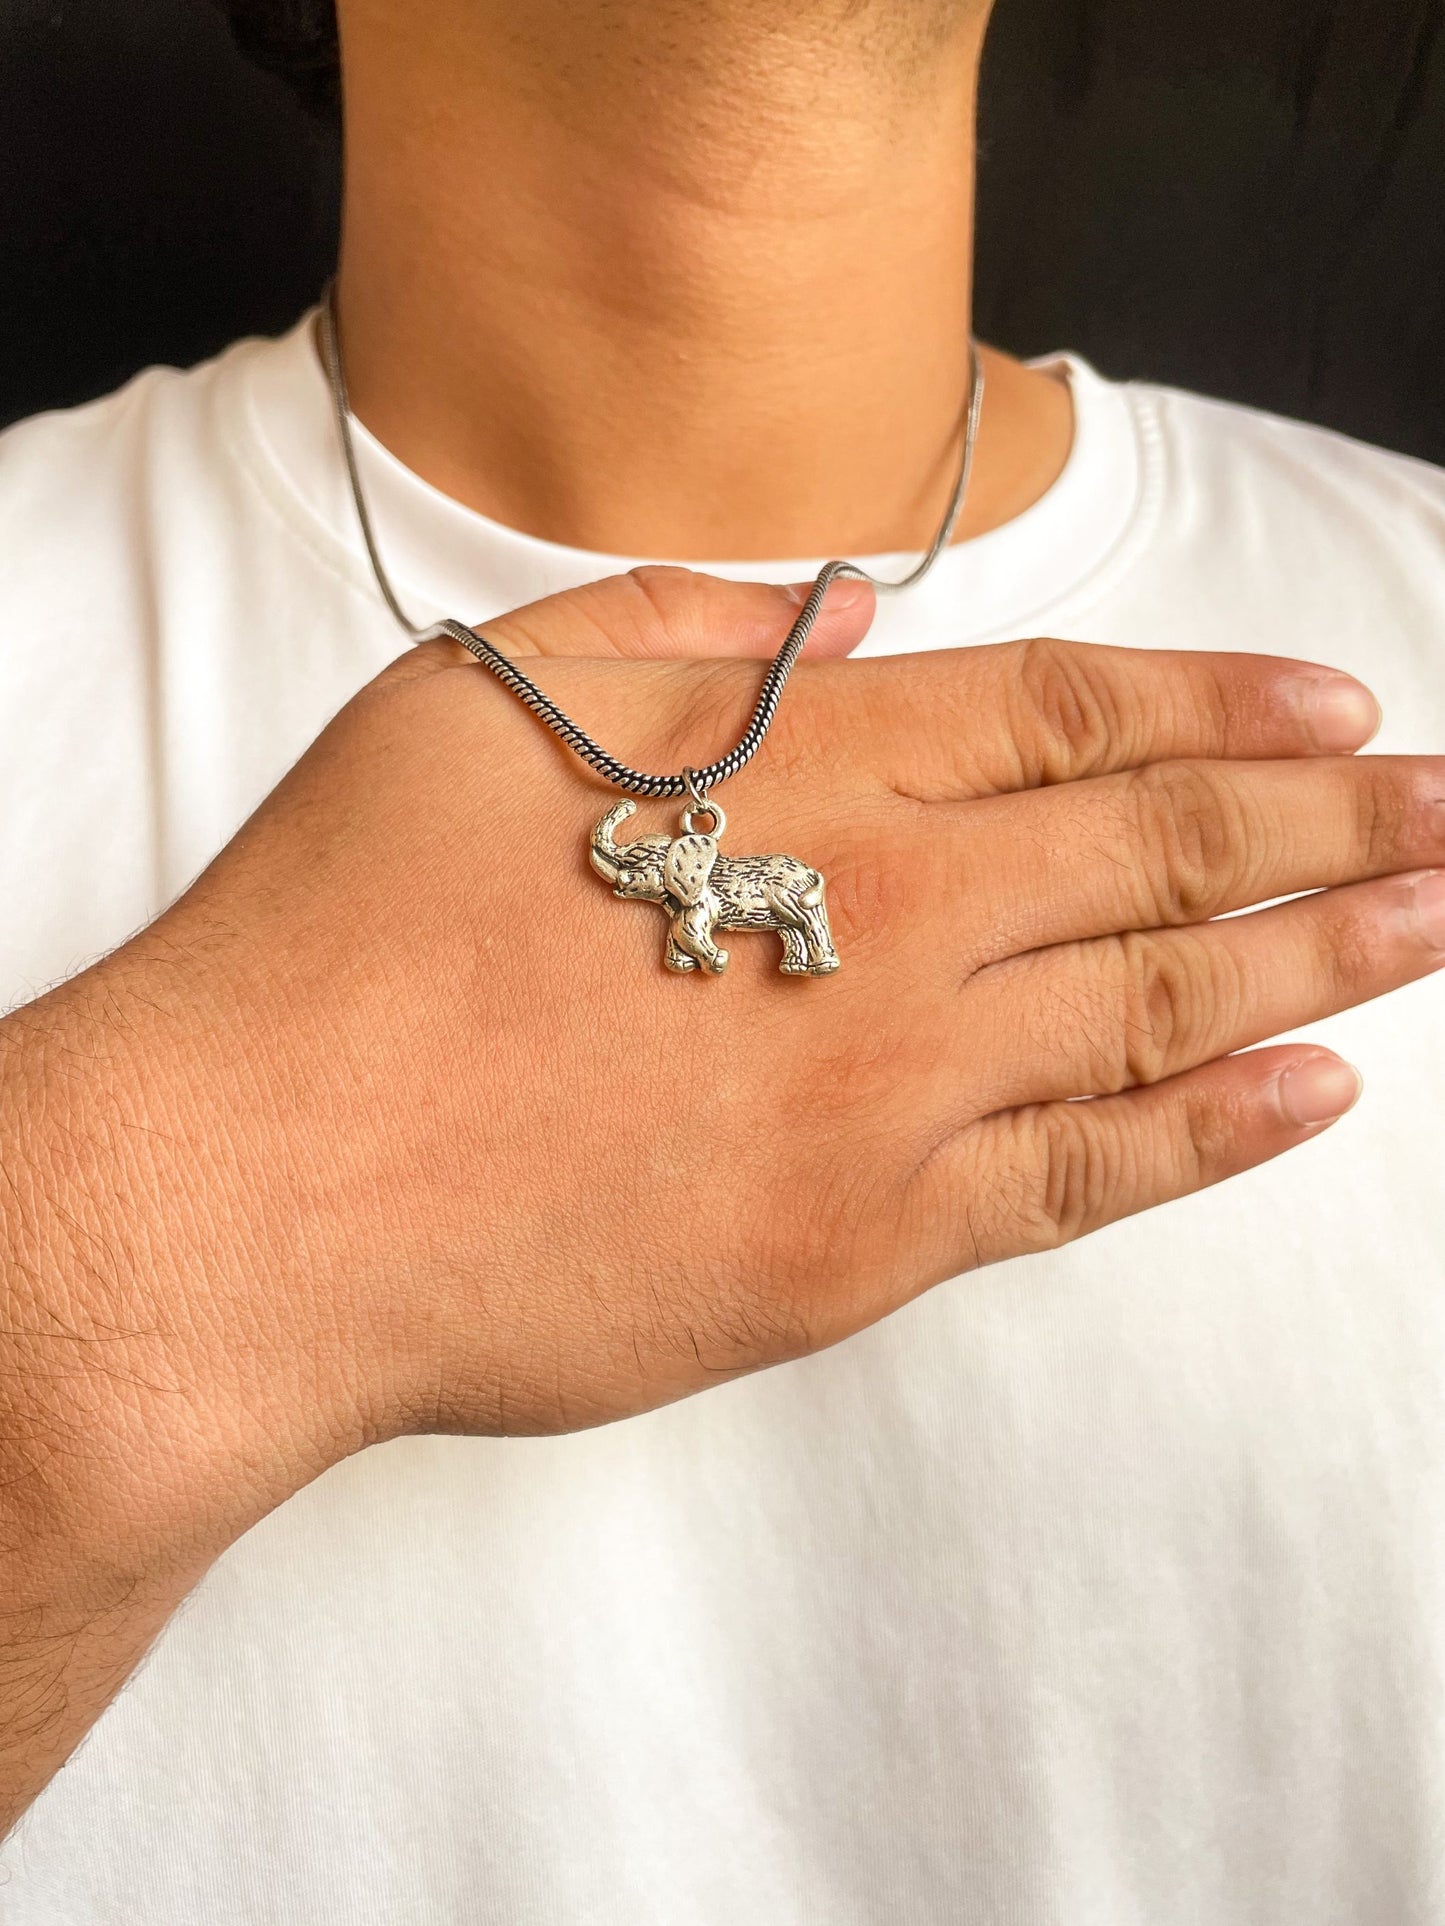 Roaring Elephant Pendant With German Silver Chain